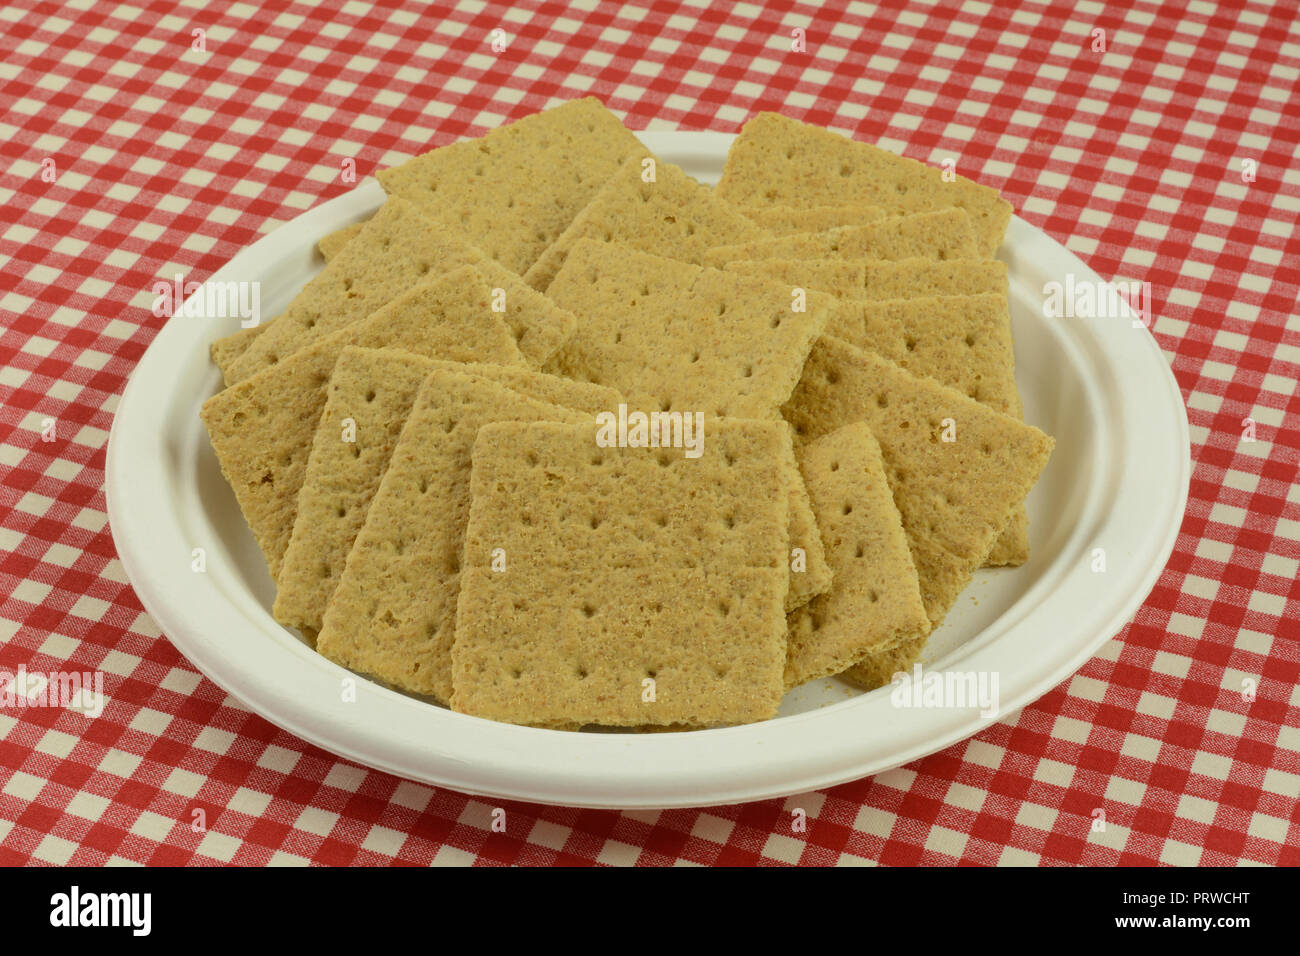 Graham cracker squares snack on white eco-friendly disposable plate in red checkered tablecloth Stock Photo